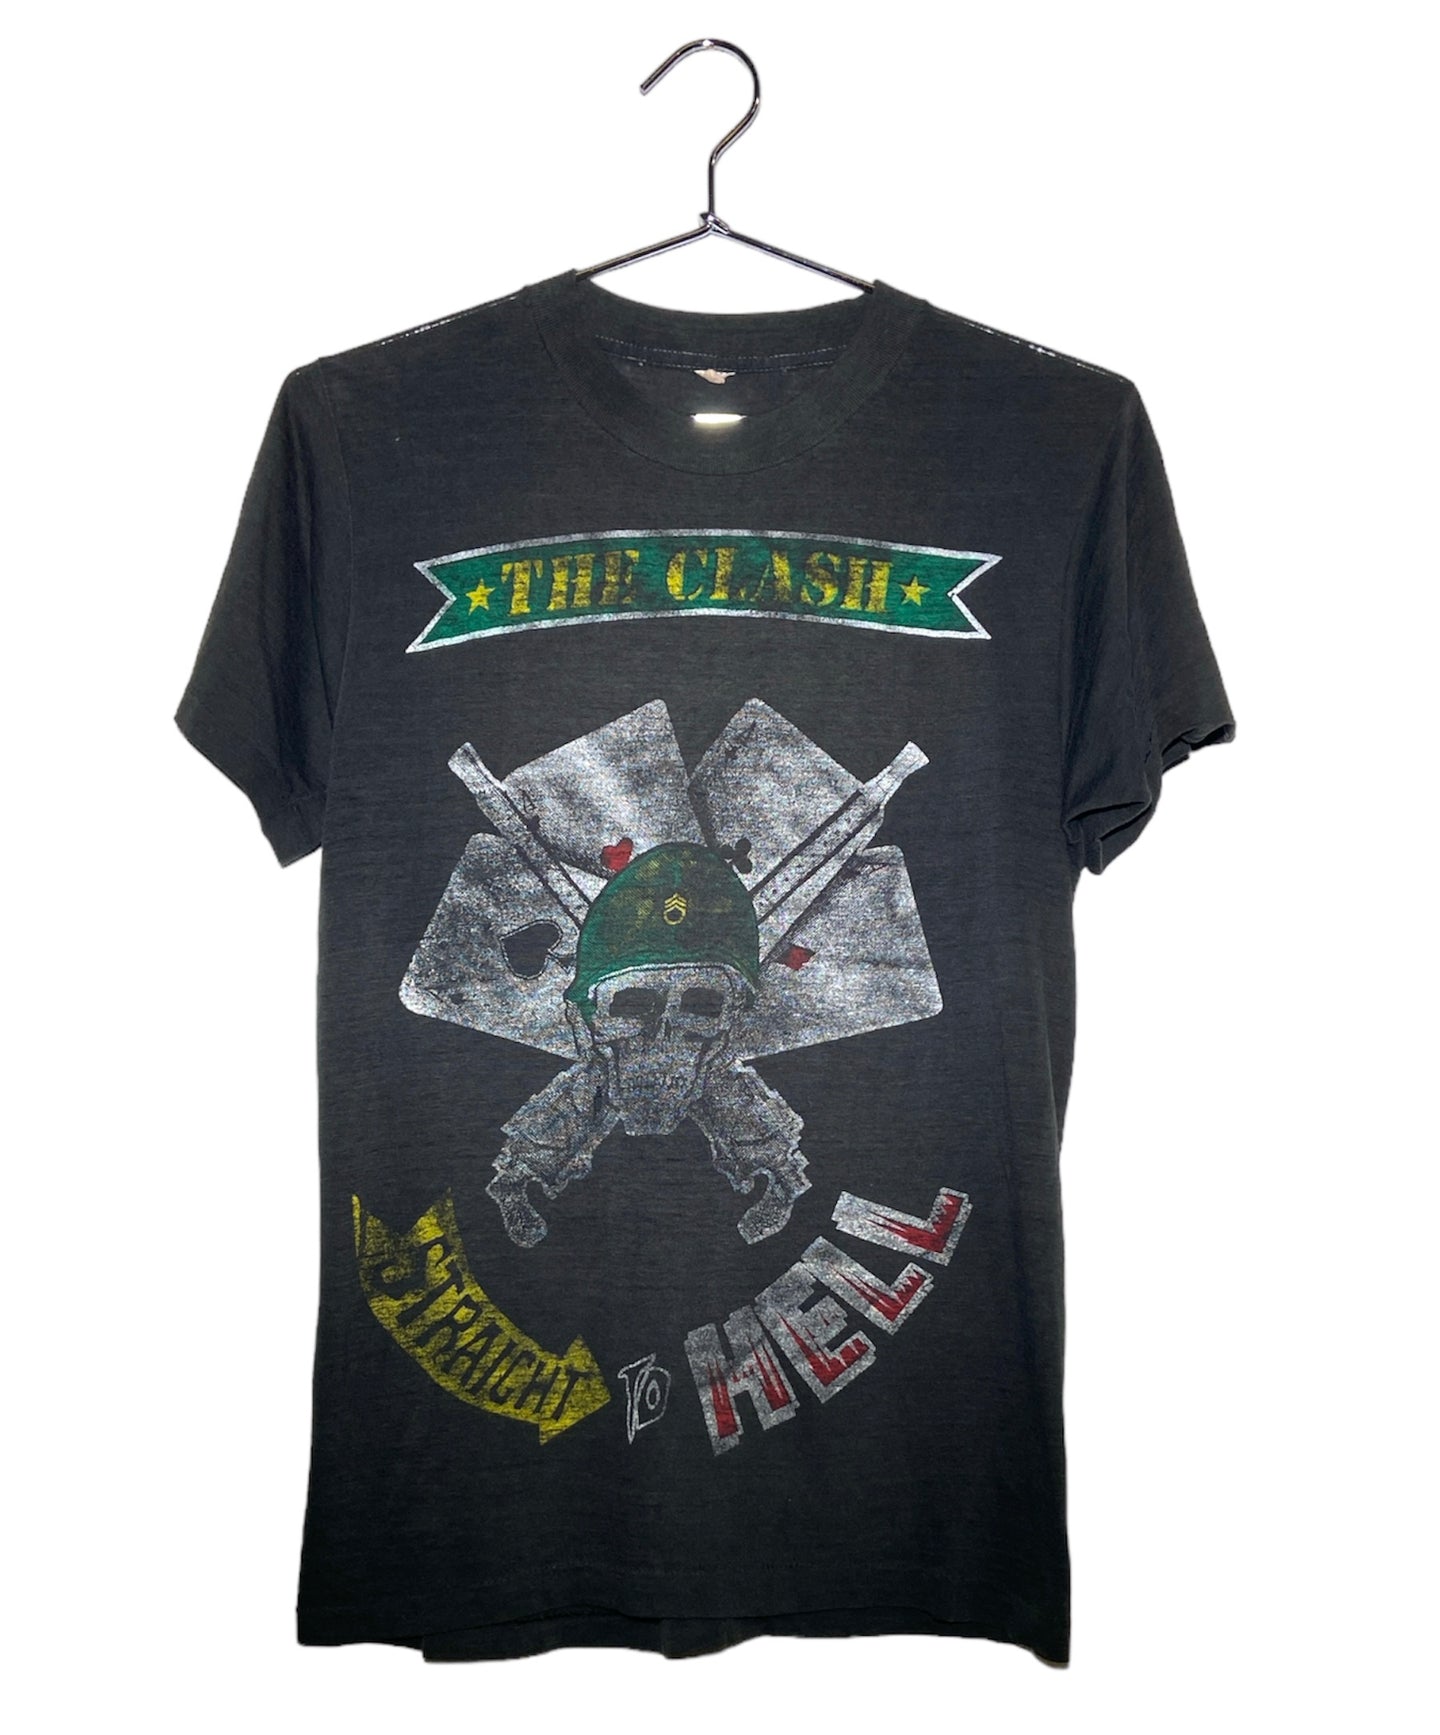 Vintage The Clash -Straight To Hell- t-shirt